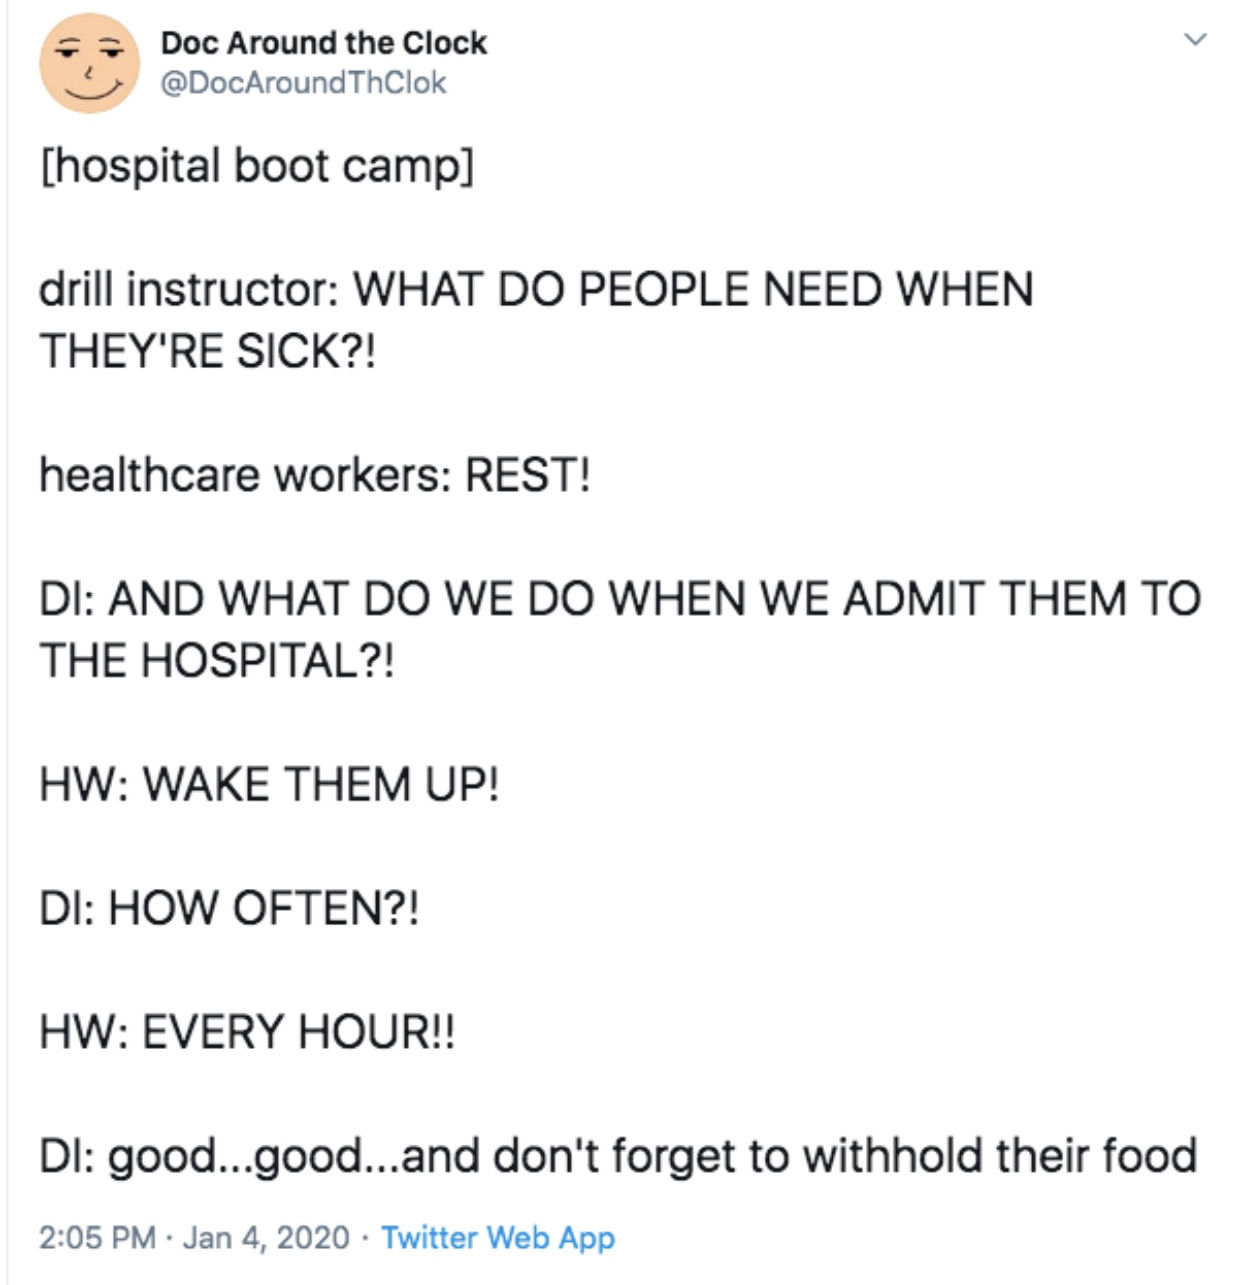 document - Doc Around the Clock Thlok hospital boot camp drill instructor What Do People Need When They'Re Sick?! healthcare workers Rest! Di And What Do We Do When We Admit Them To The Hospital?! Hw Wake Them Up! Di How Often?! Hw Every Hour!! Dl good...